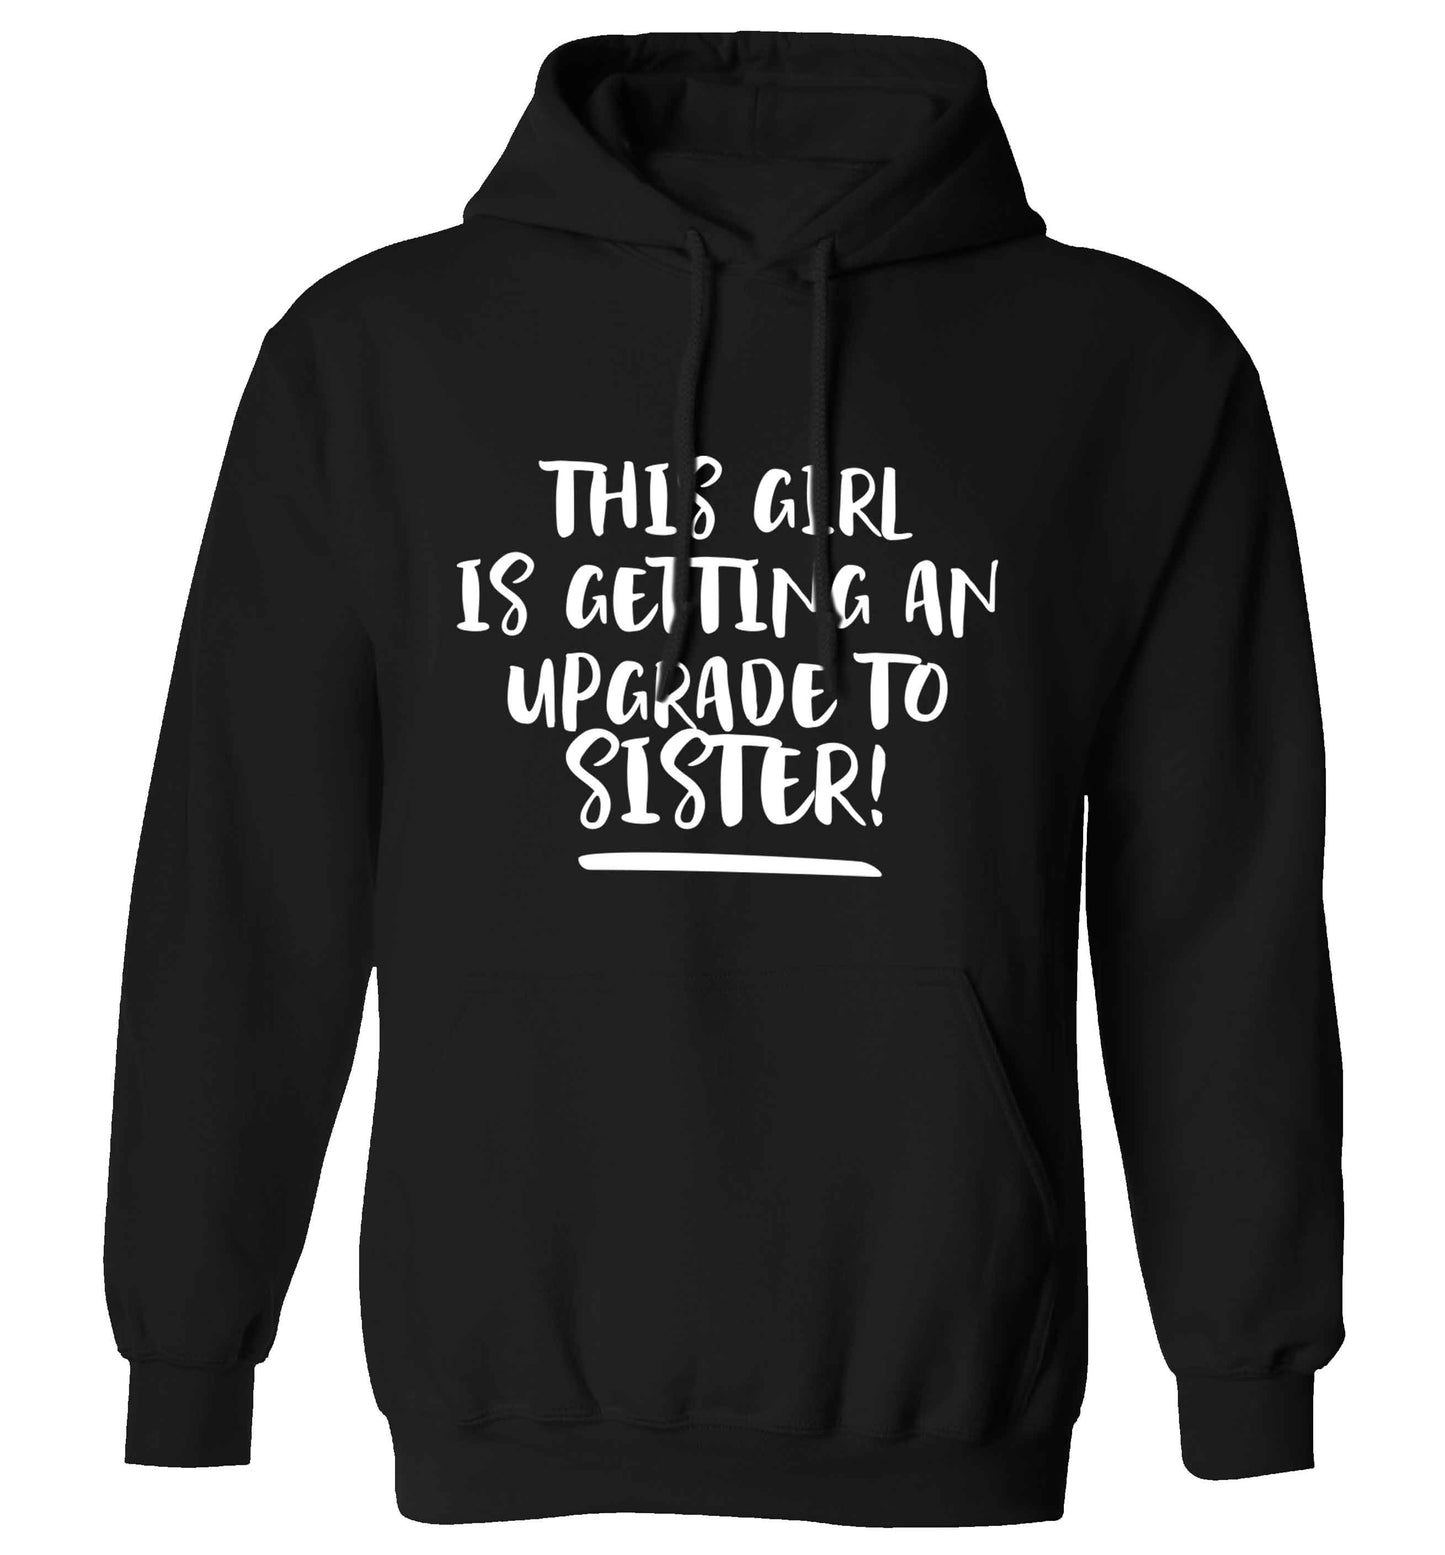 This girl is getting an upgrade to sister! adults unisex black hoodie 2XL